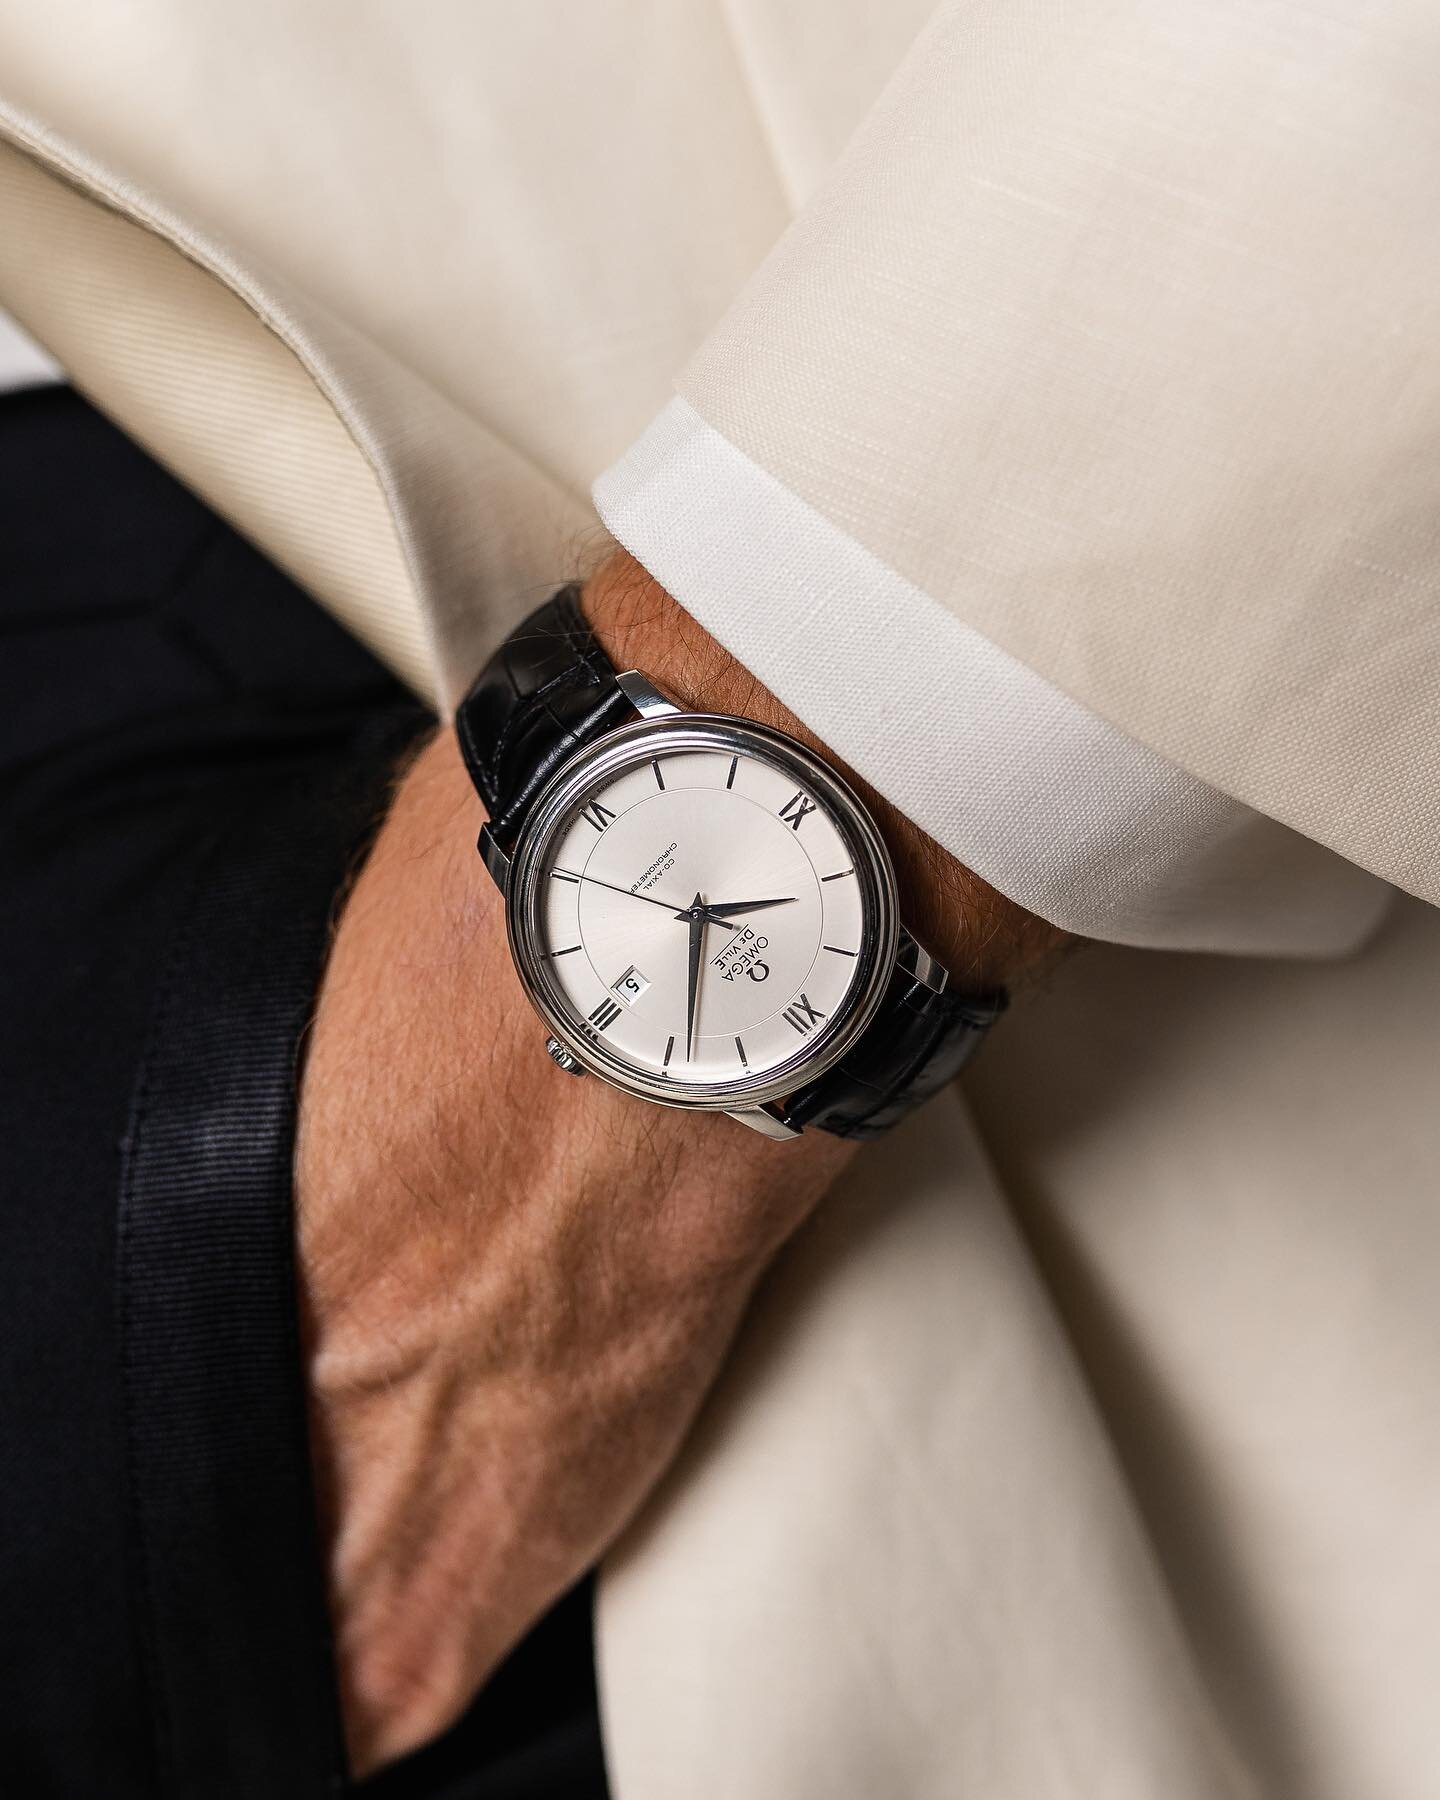 As far as dress watches go, it doesn&rsquo;t get more timeless than the @omega De Ville Prestige Co-Axial Chronometer. Featuring an automatic movement and a sleek 39.5mm case, it&rsquo;s the ideal combination of form and function, emanating an effort